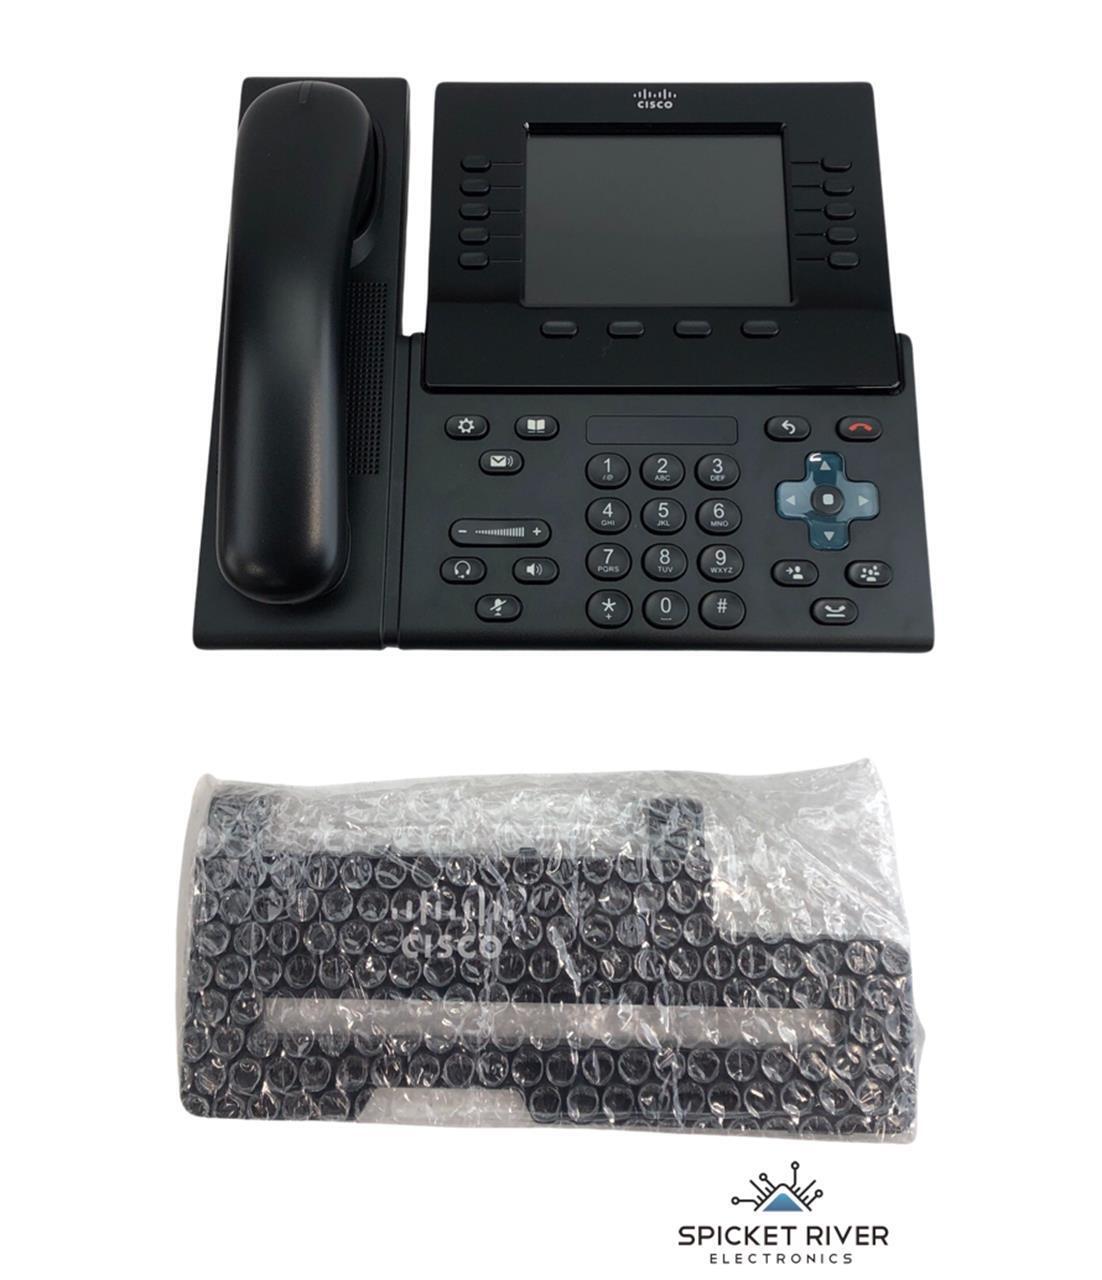 NEW - Open Box - Cisco CP-8961-C-K9 Unified IP Business Phone